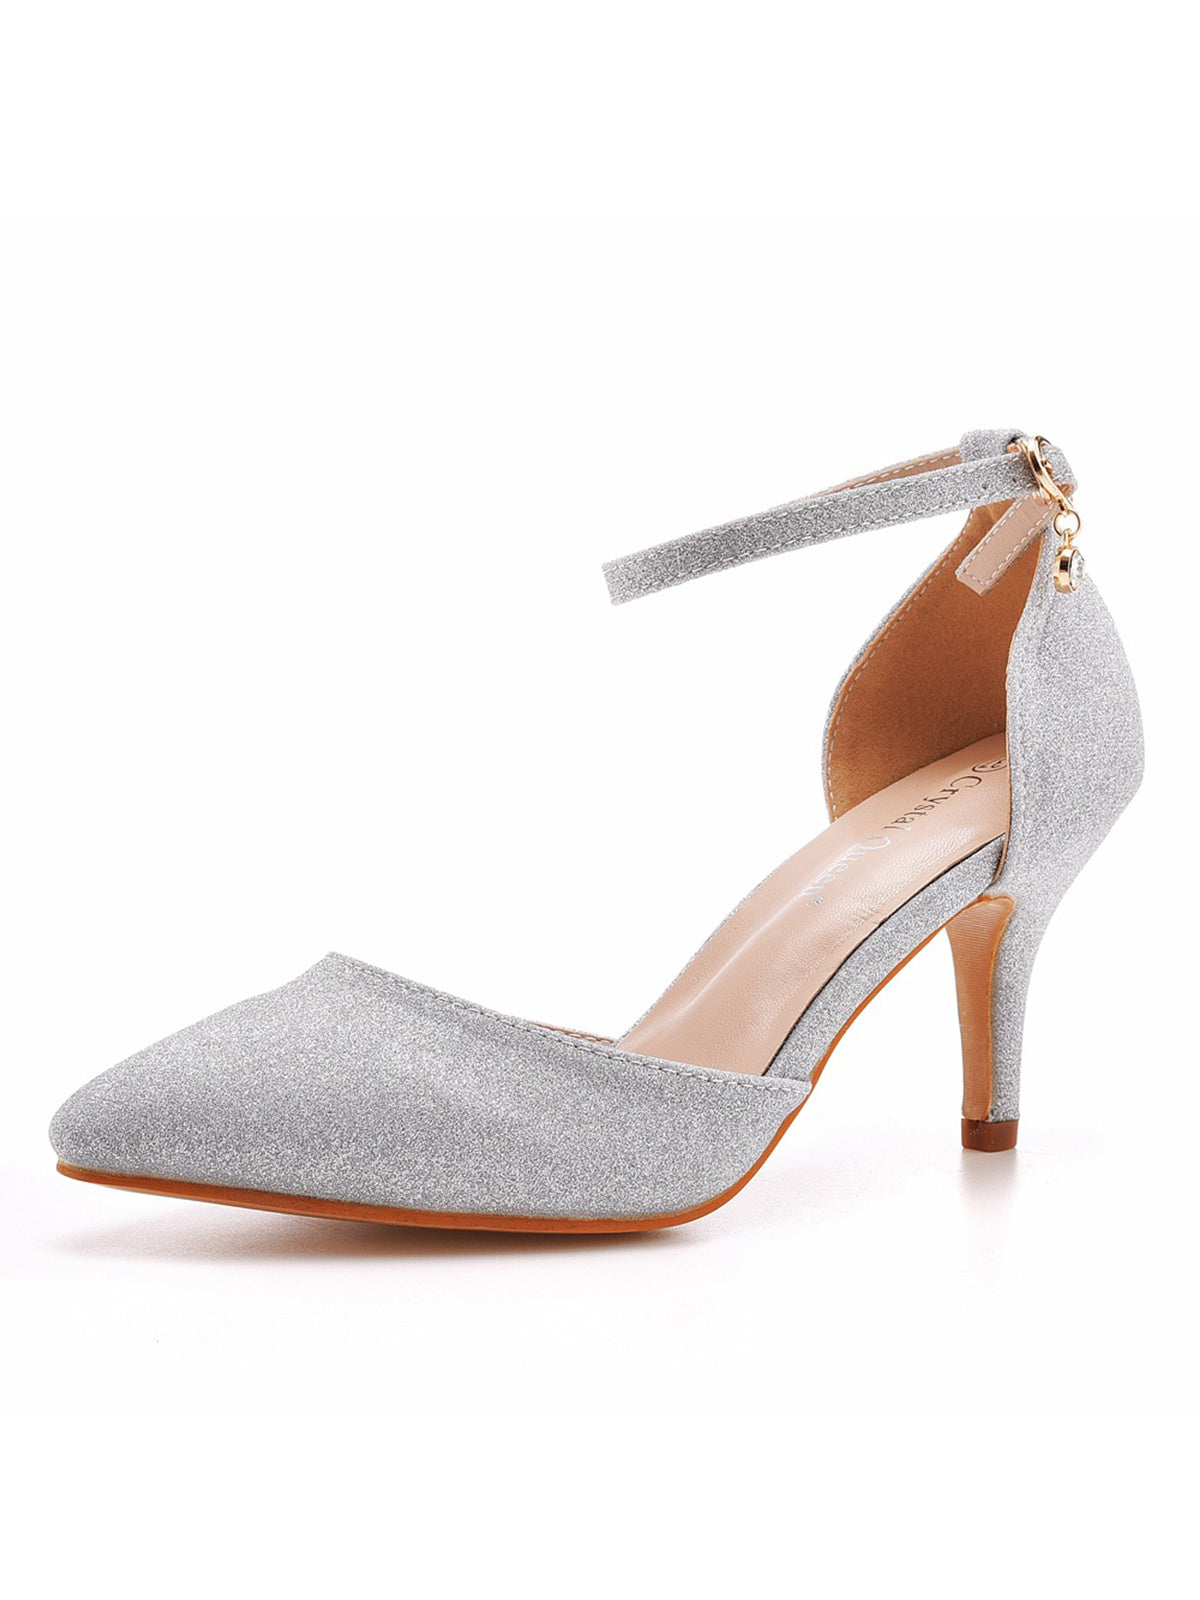 Women's Wedding Shoes Pointed Toe Ankle Strap Stiletto Heels